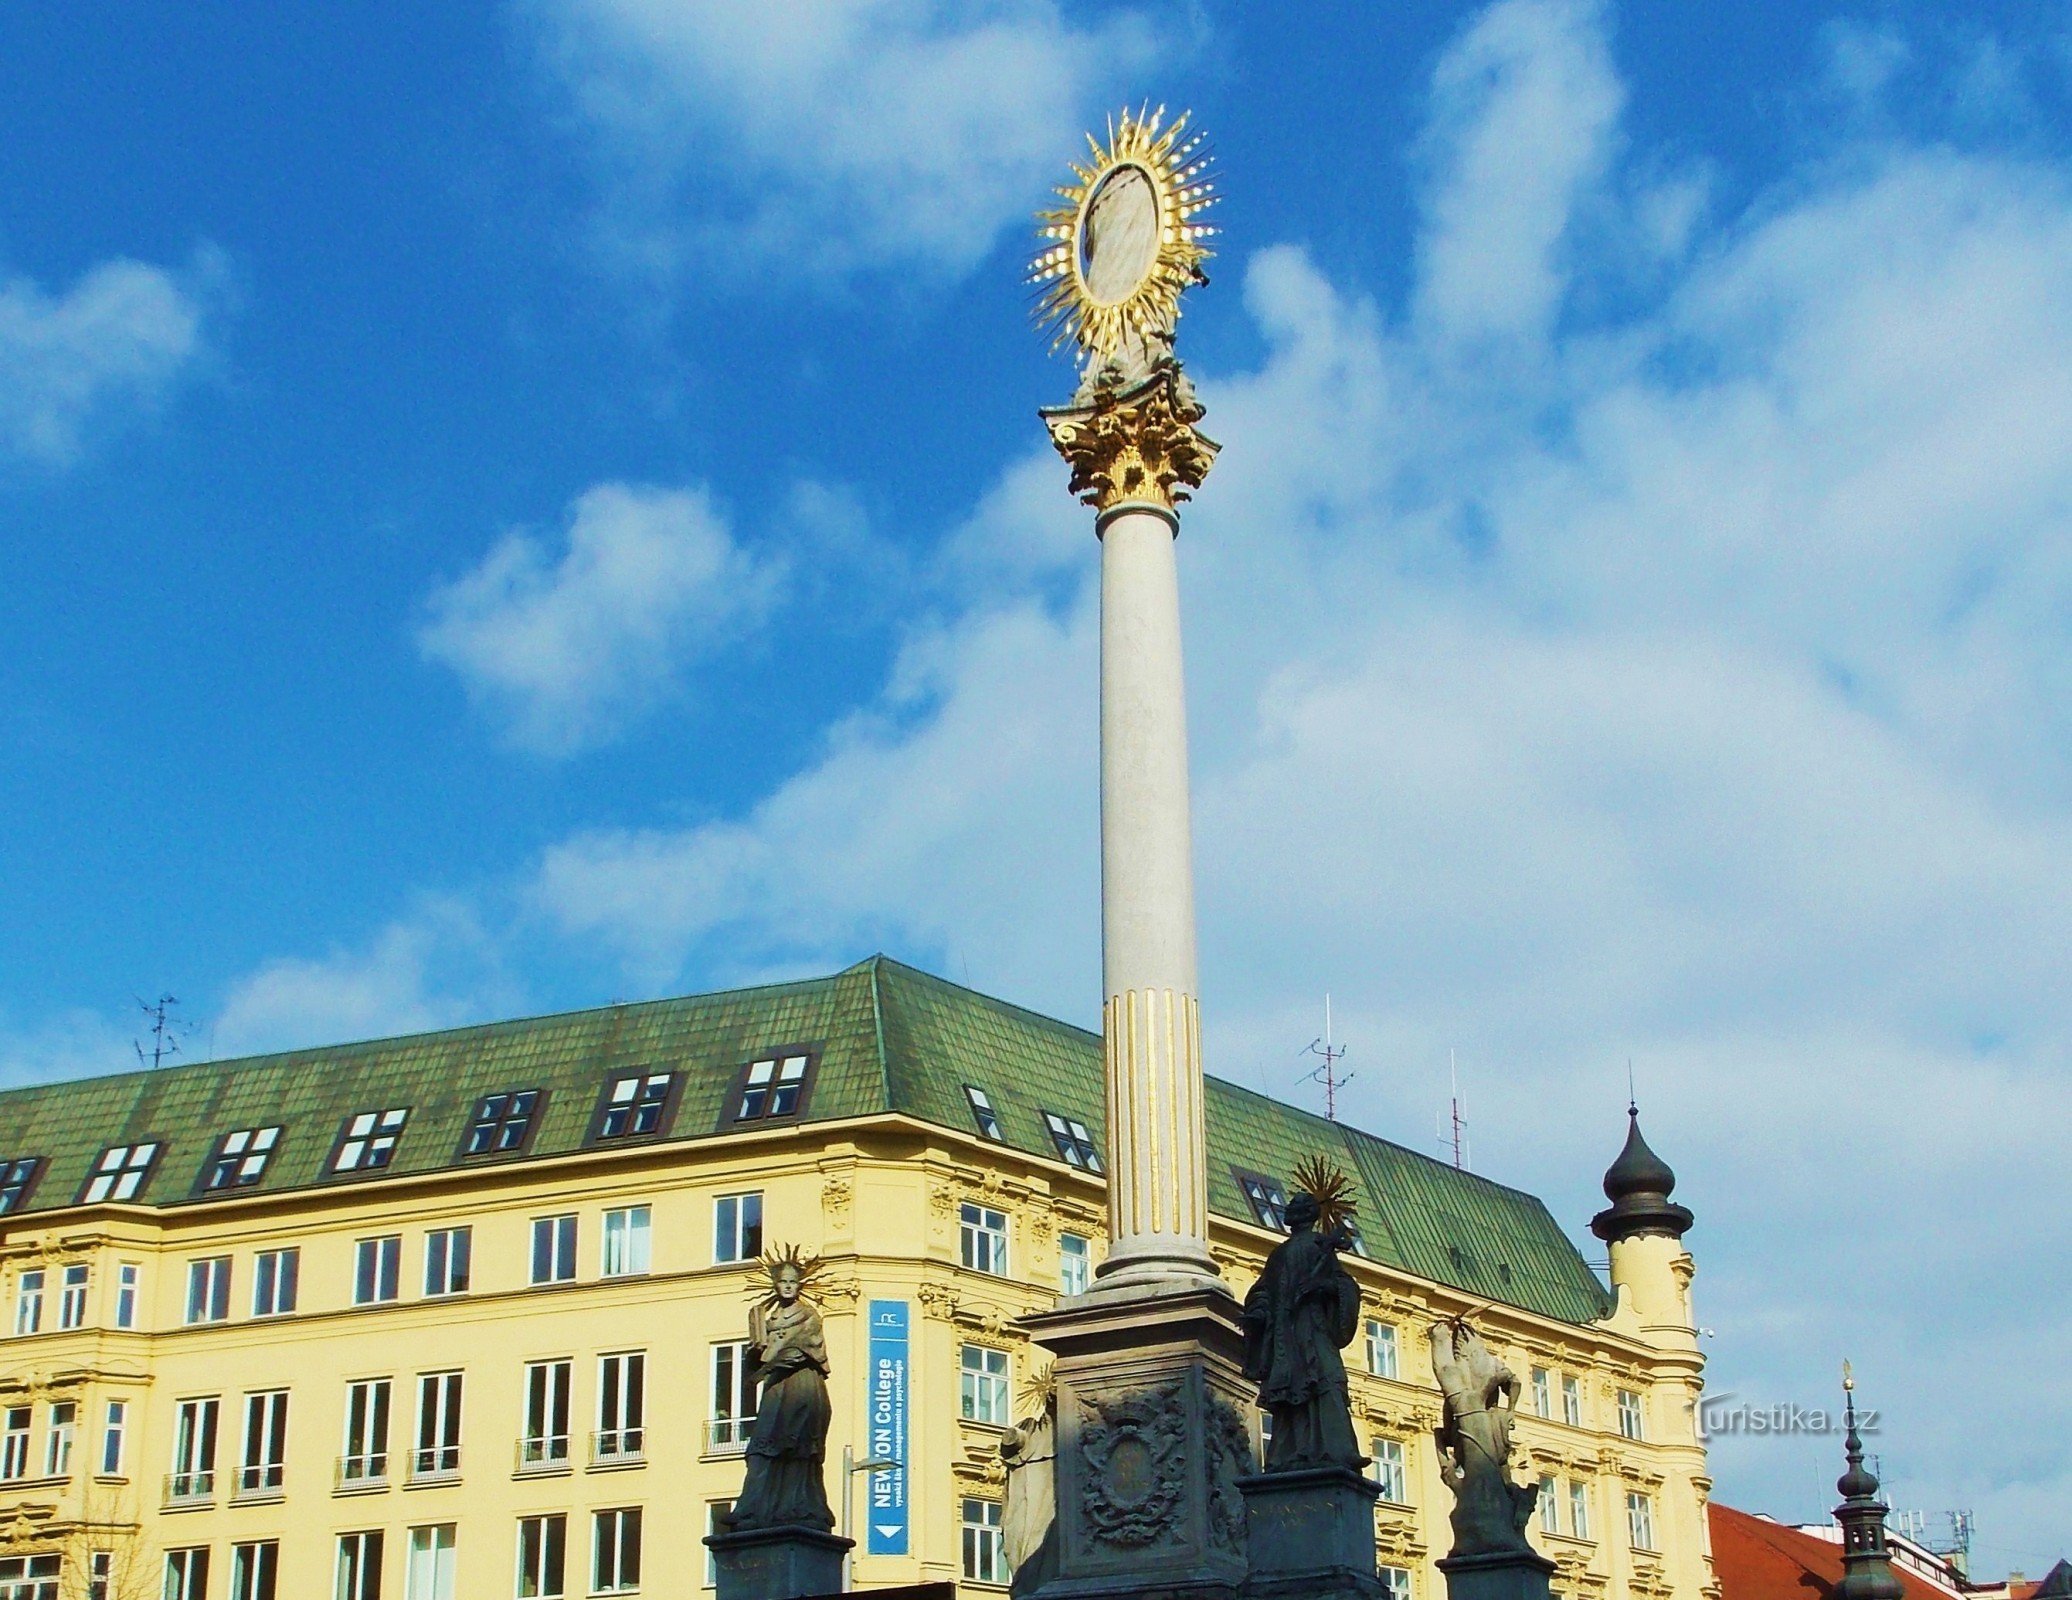 The Golden Ship on Freedom Square in Brno